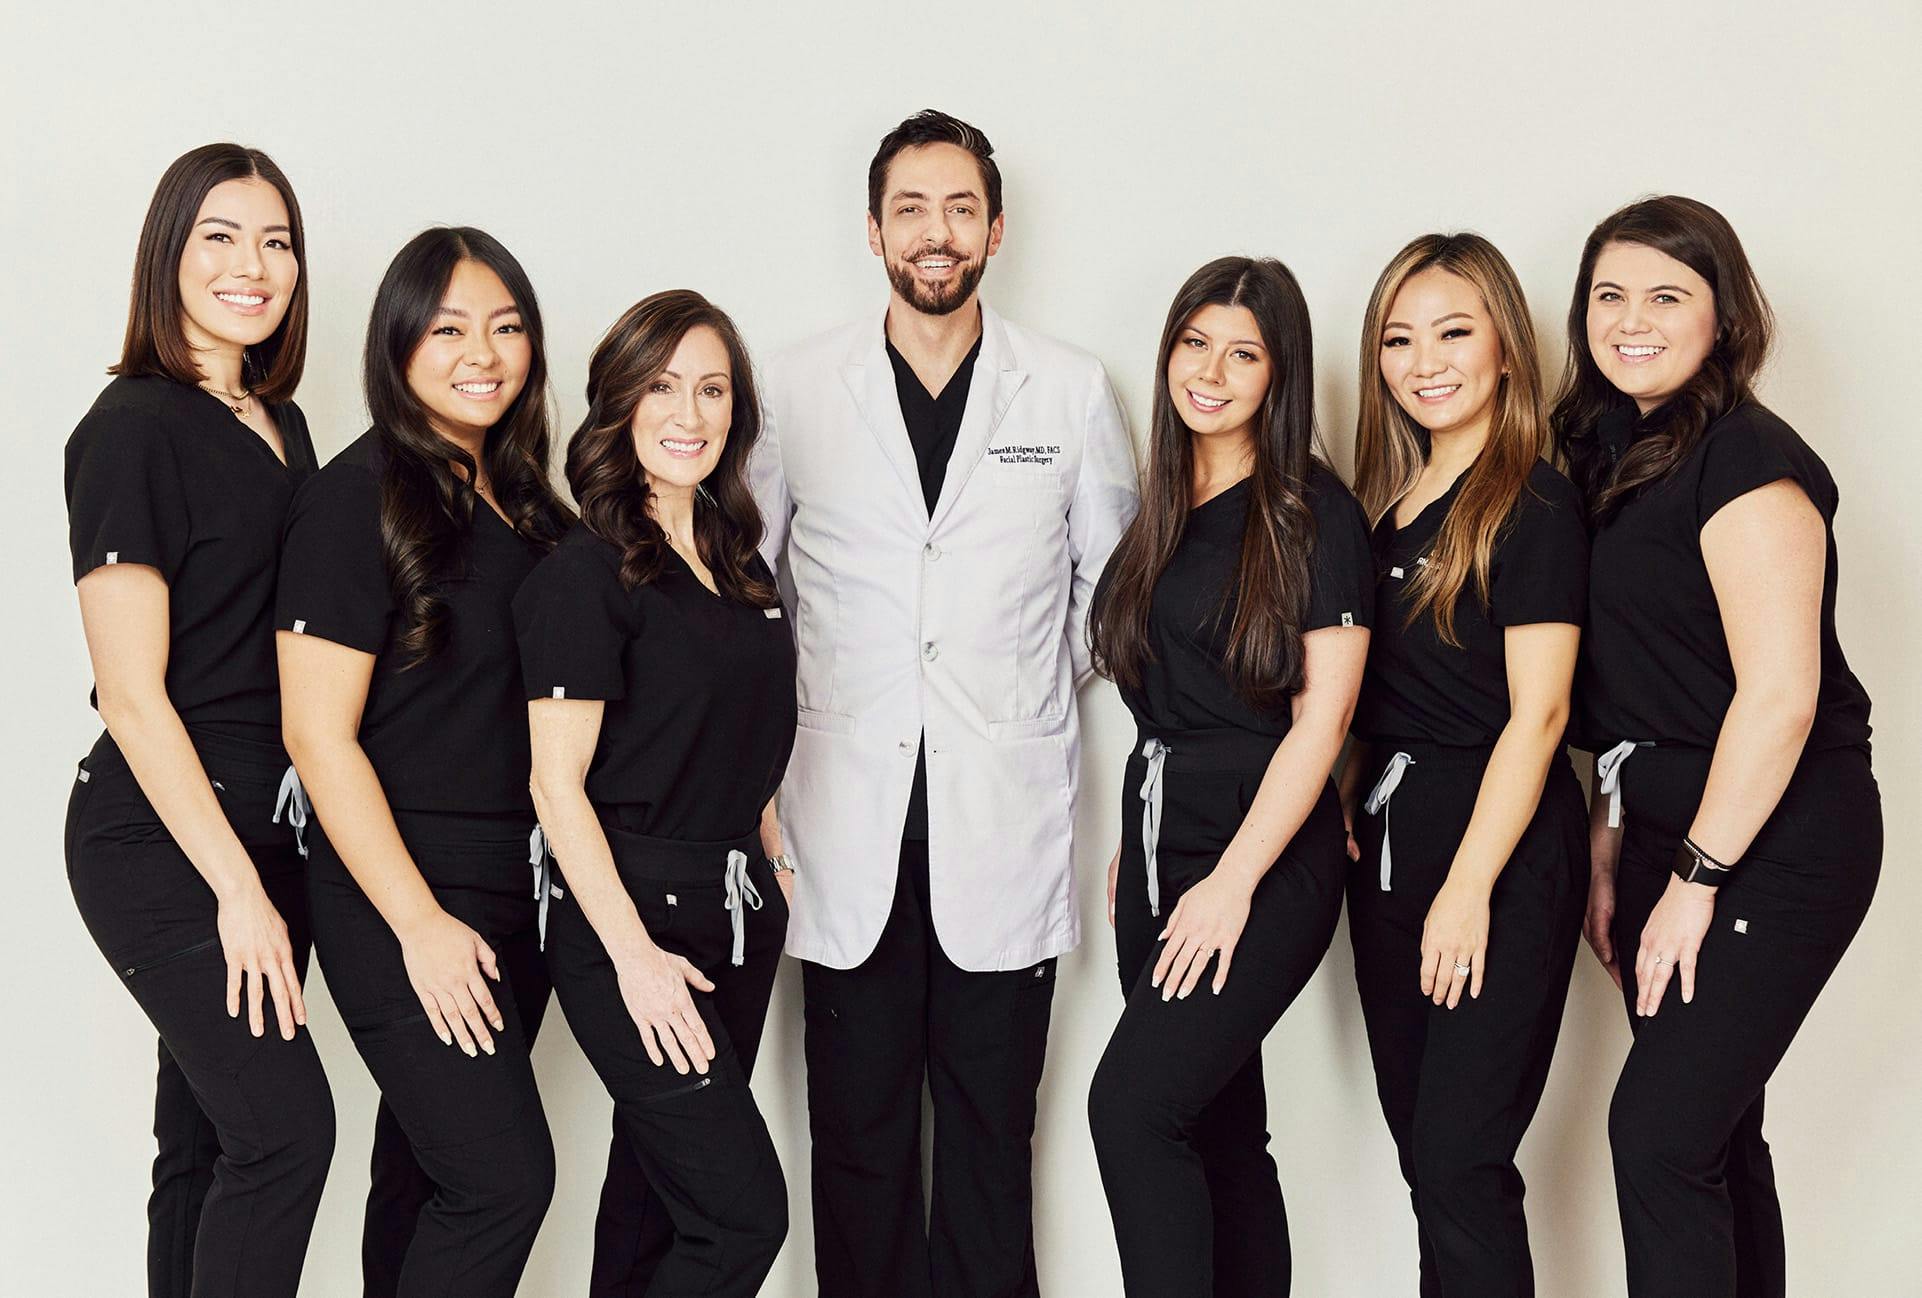 Staff at Ridgway Face & Aesthetic Center